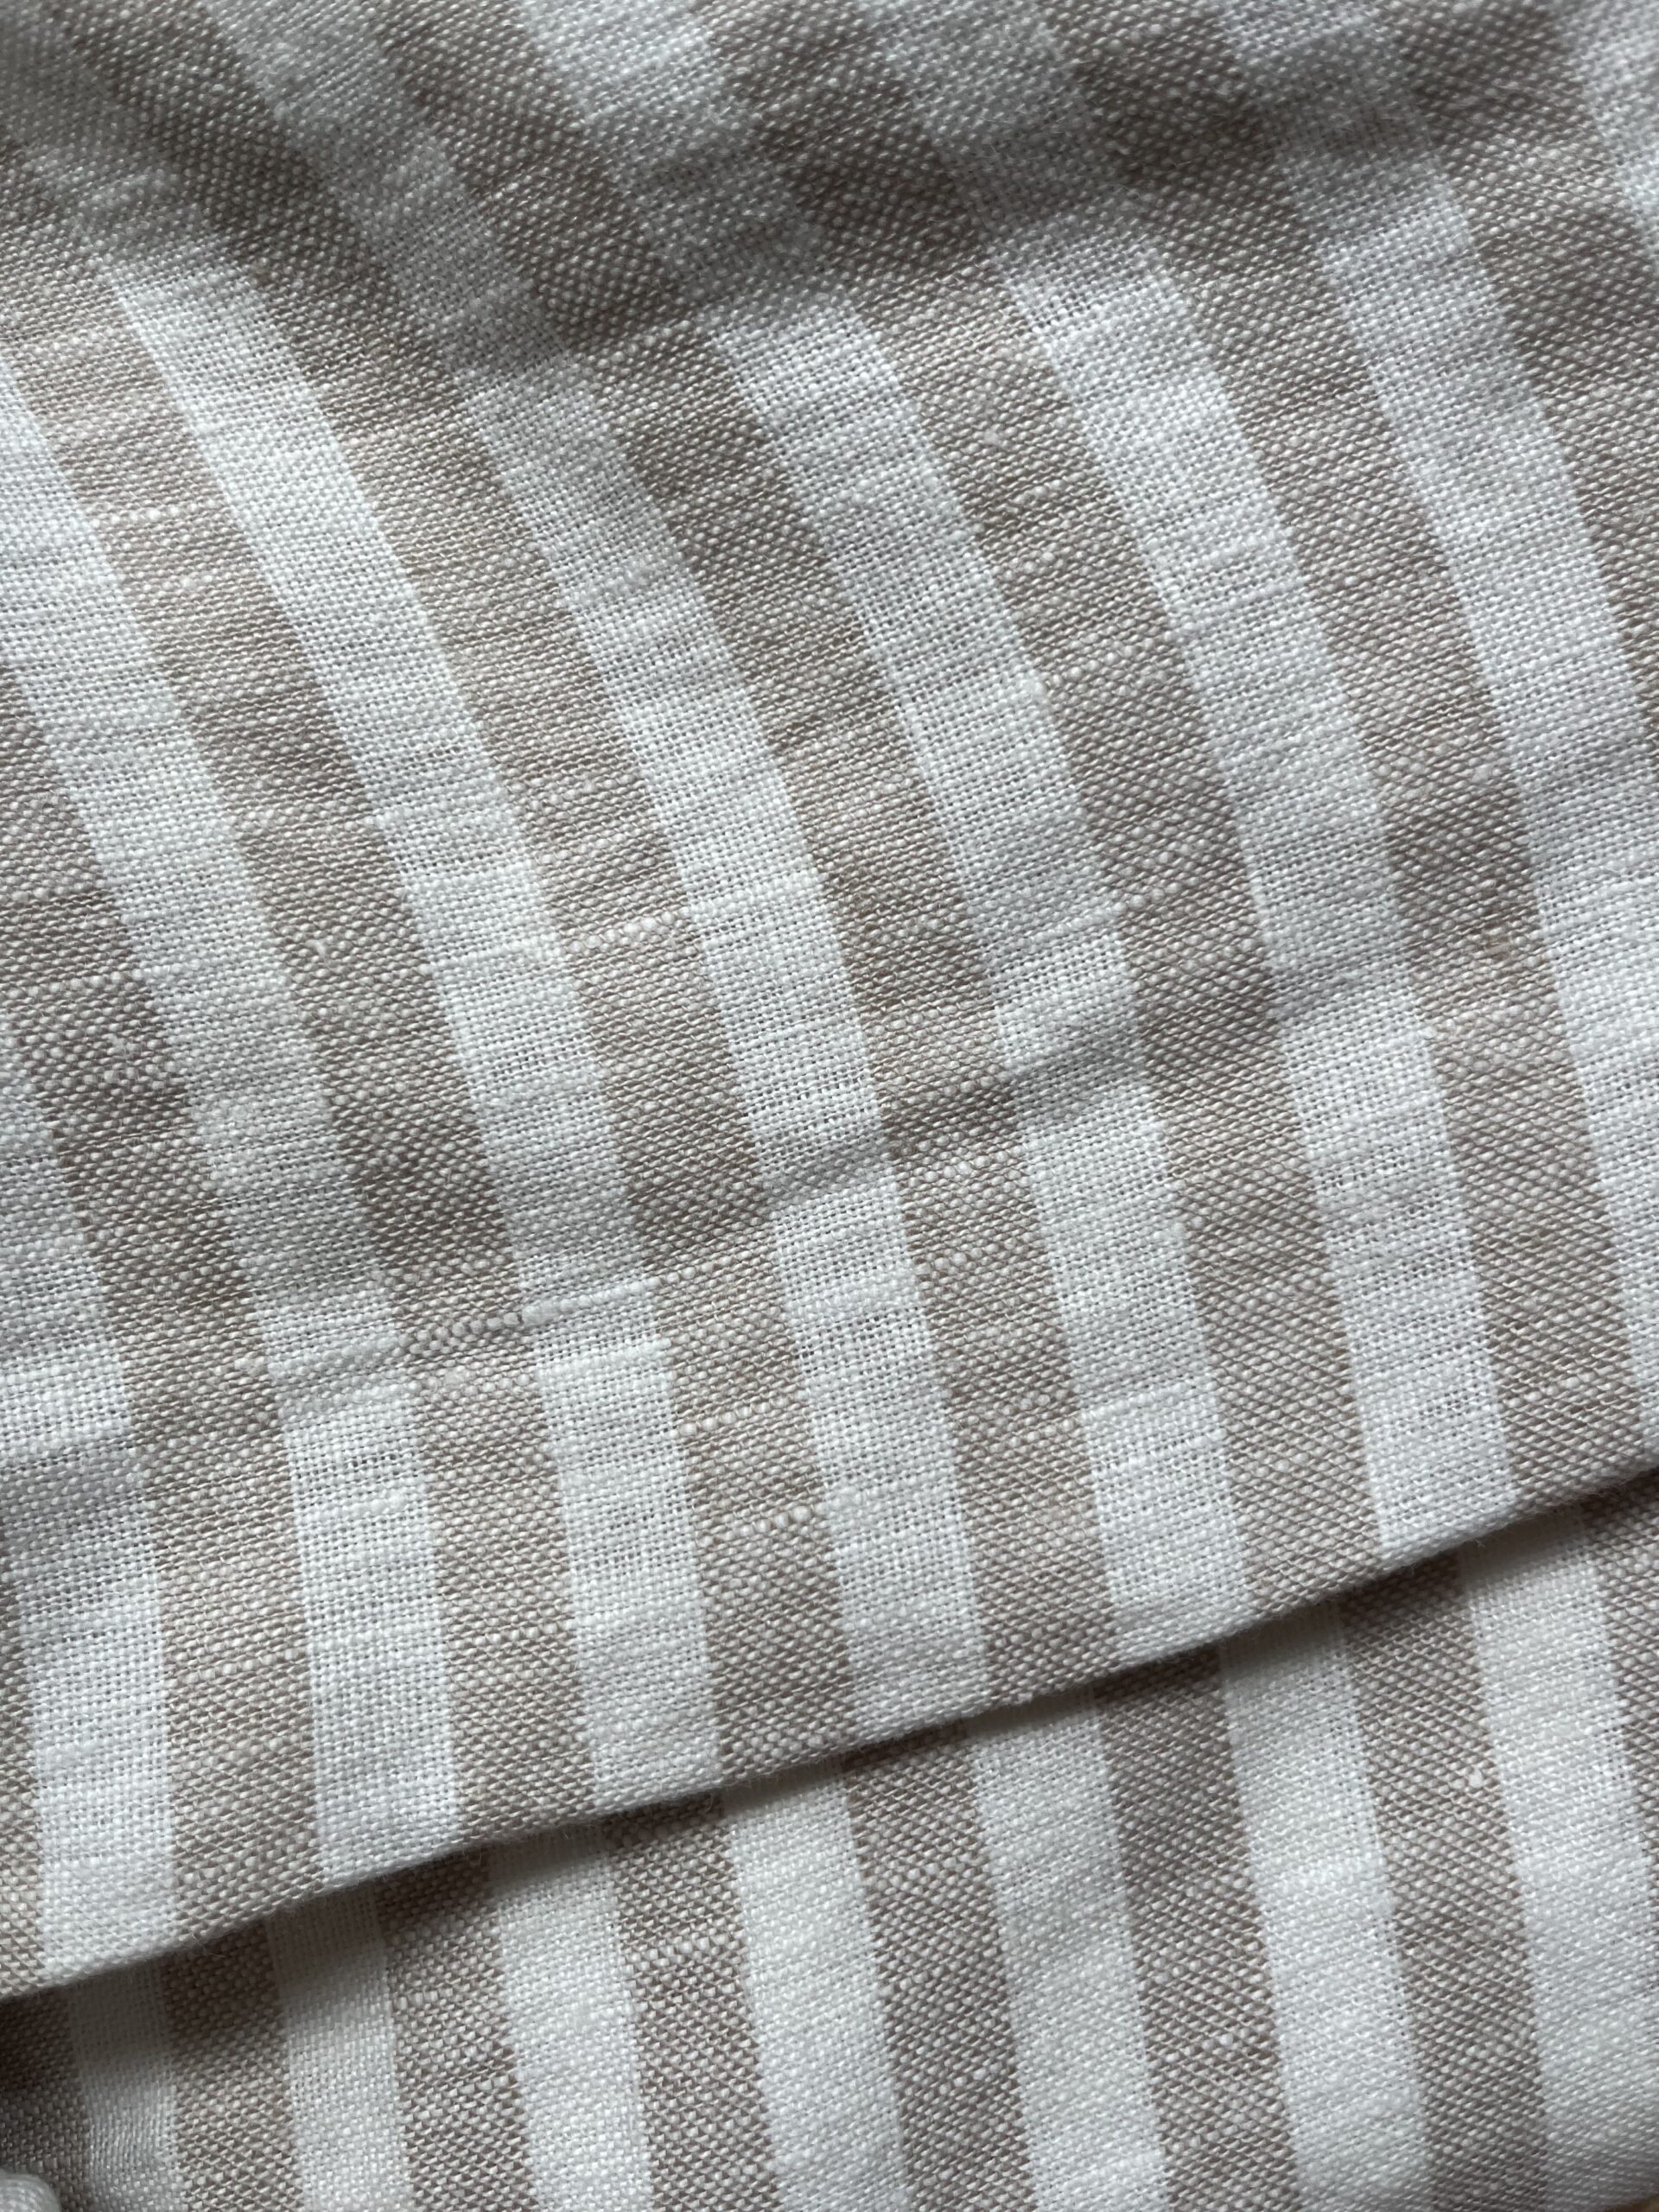 Close-up of a beige and white striped fabric with a soft texture, showing the folds and weave pattern.